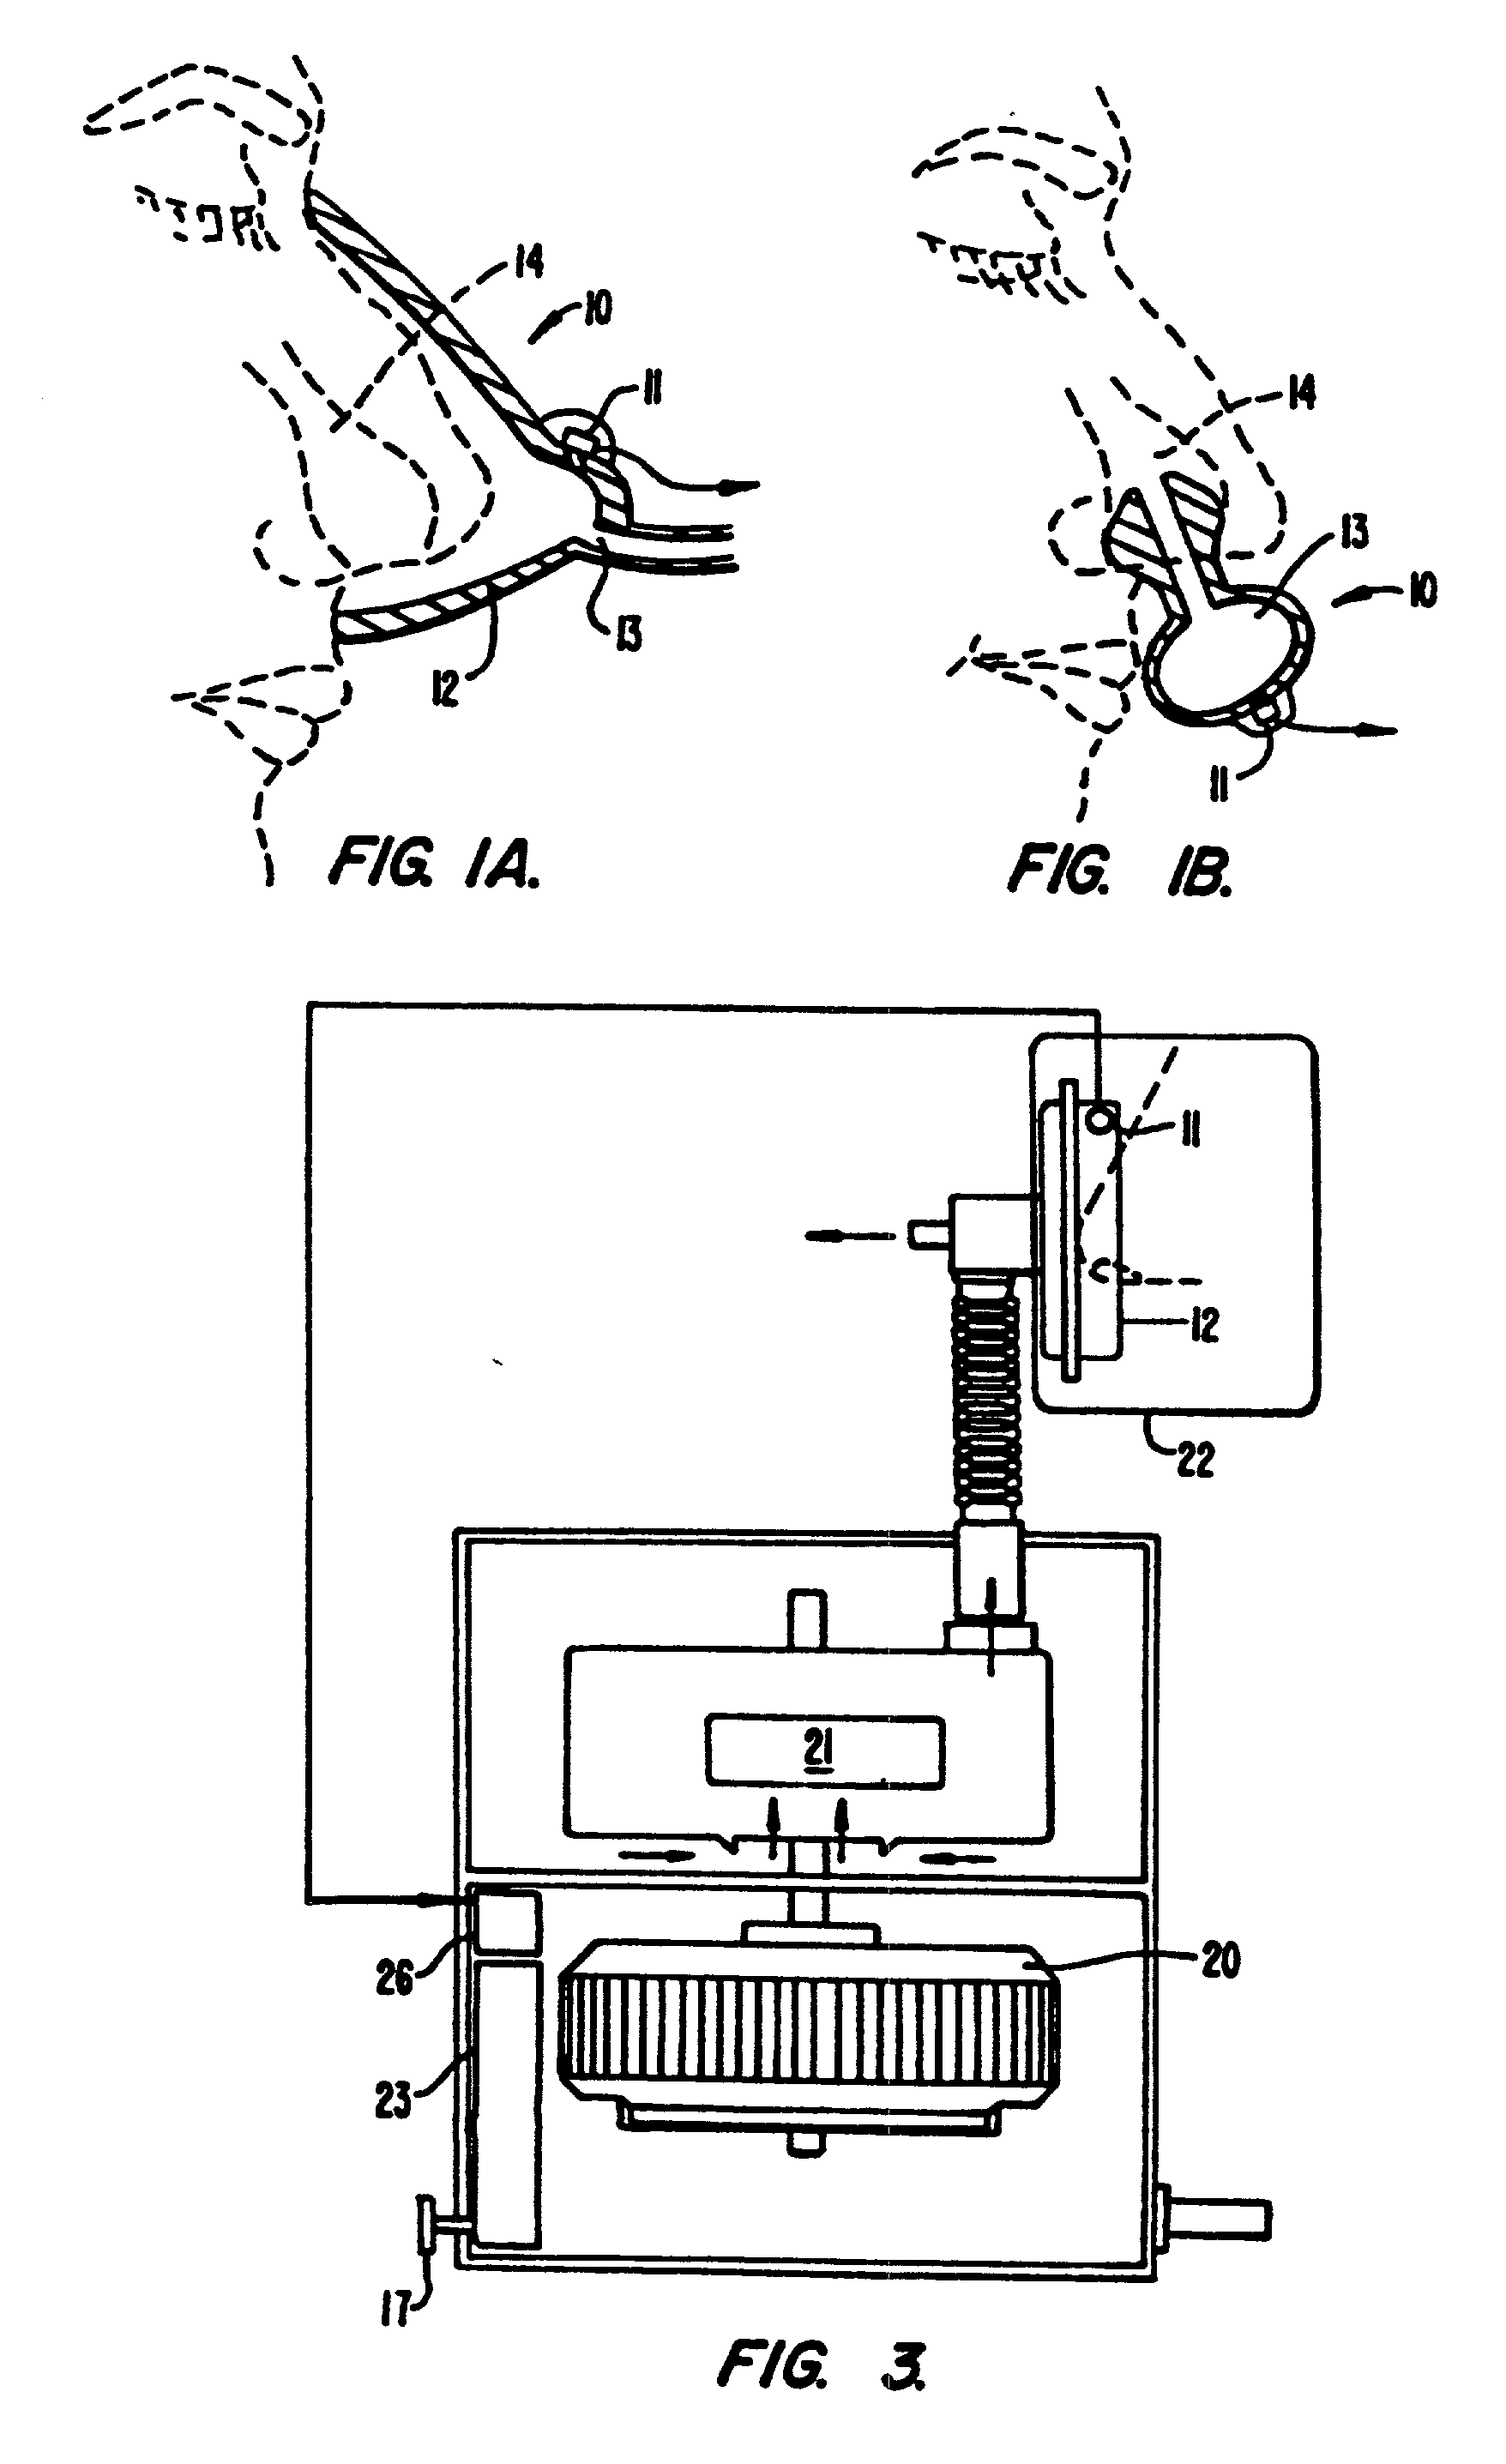 Method and apparatus useful in the diagnosis of obstructive sleep apnea of a patient